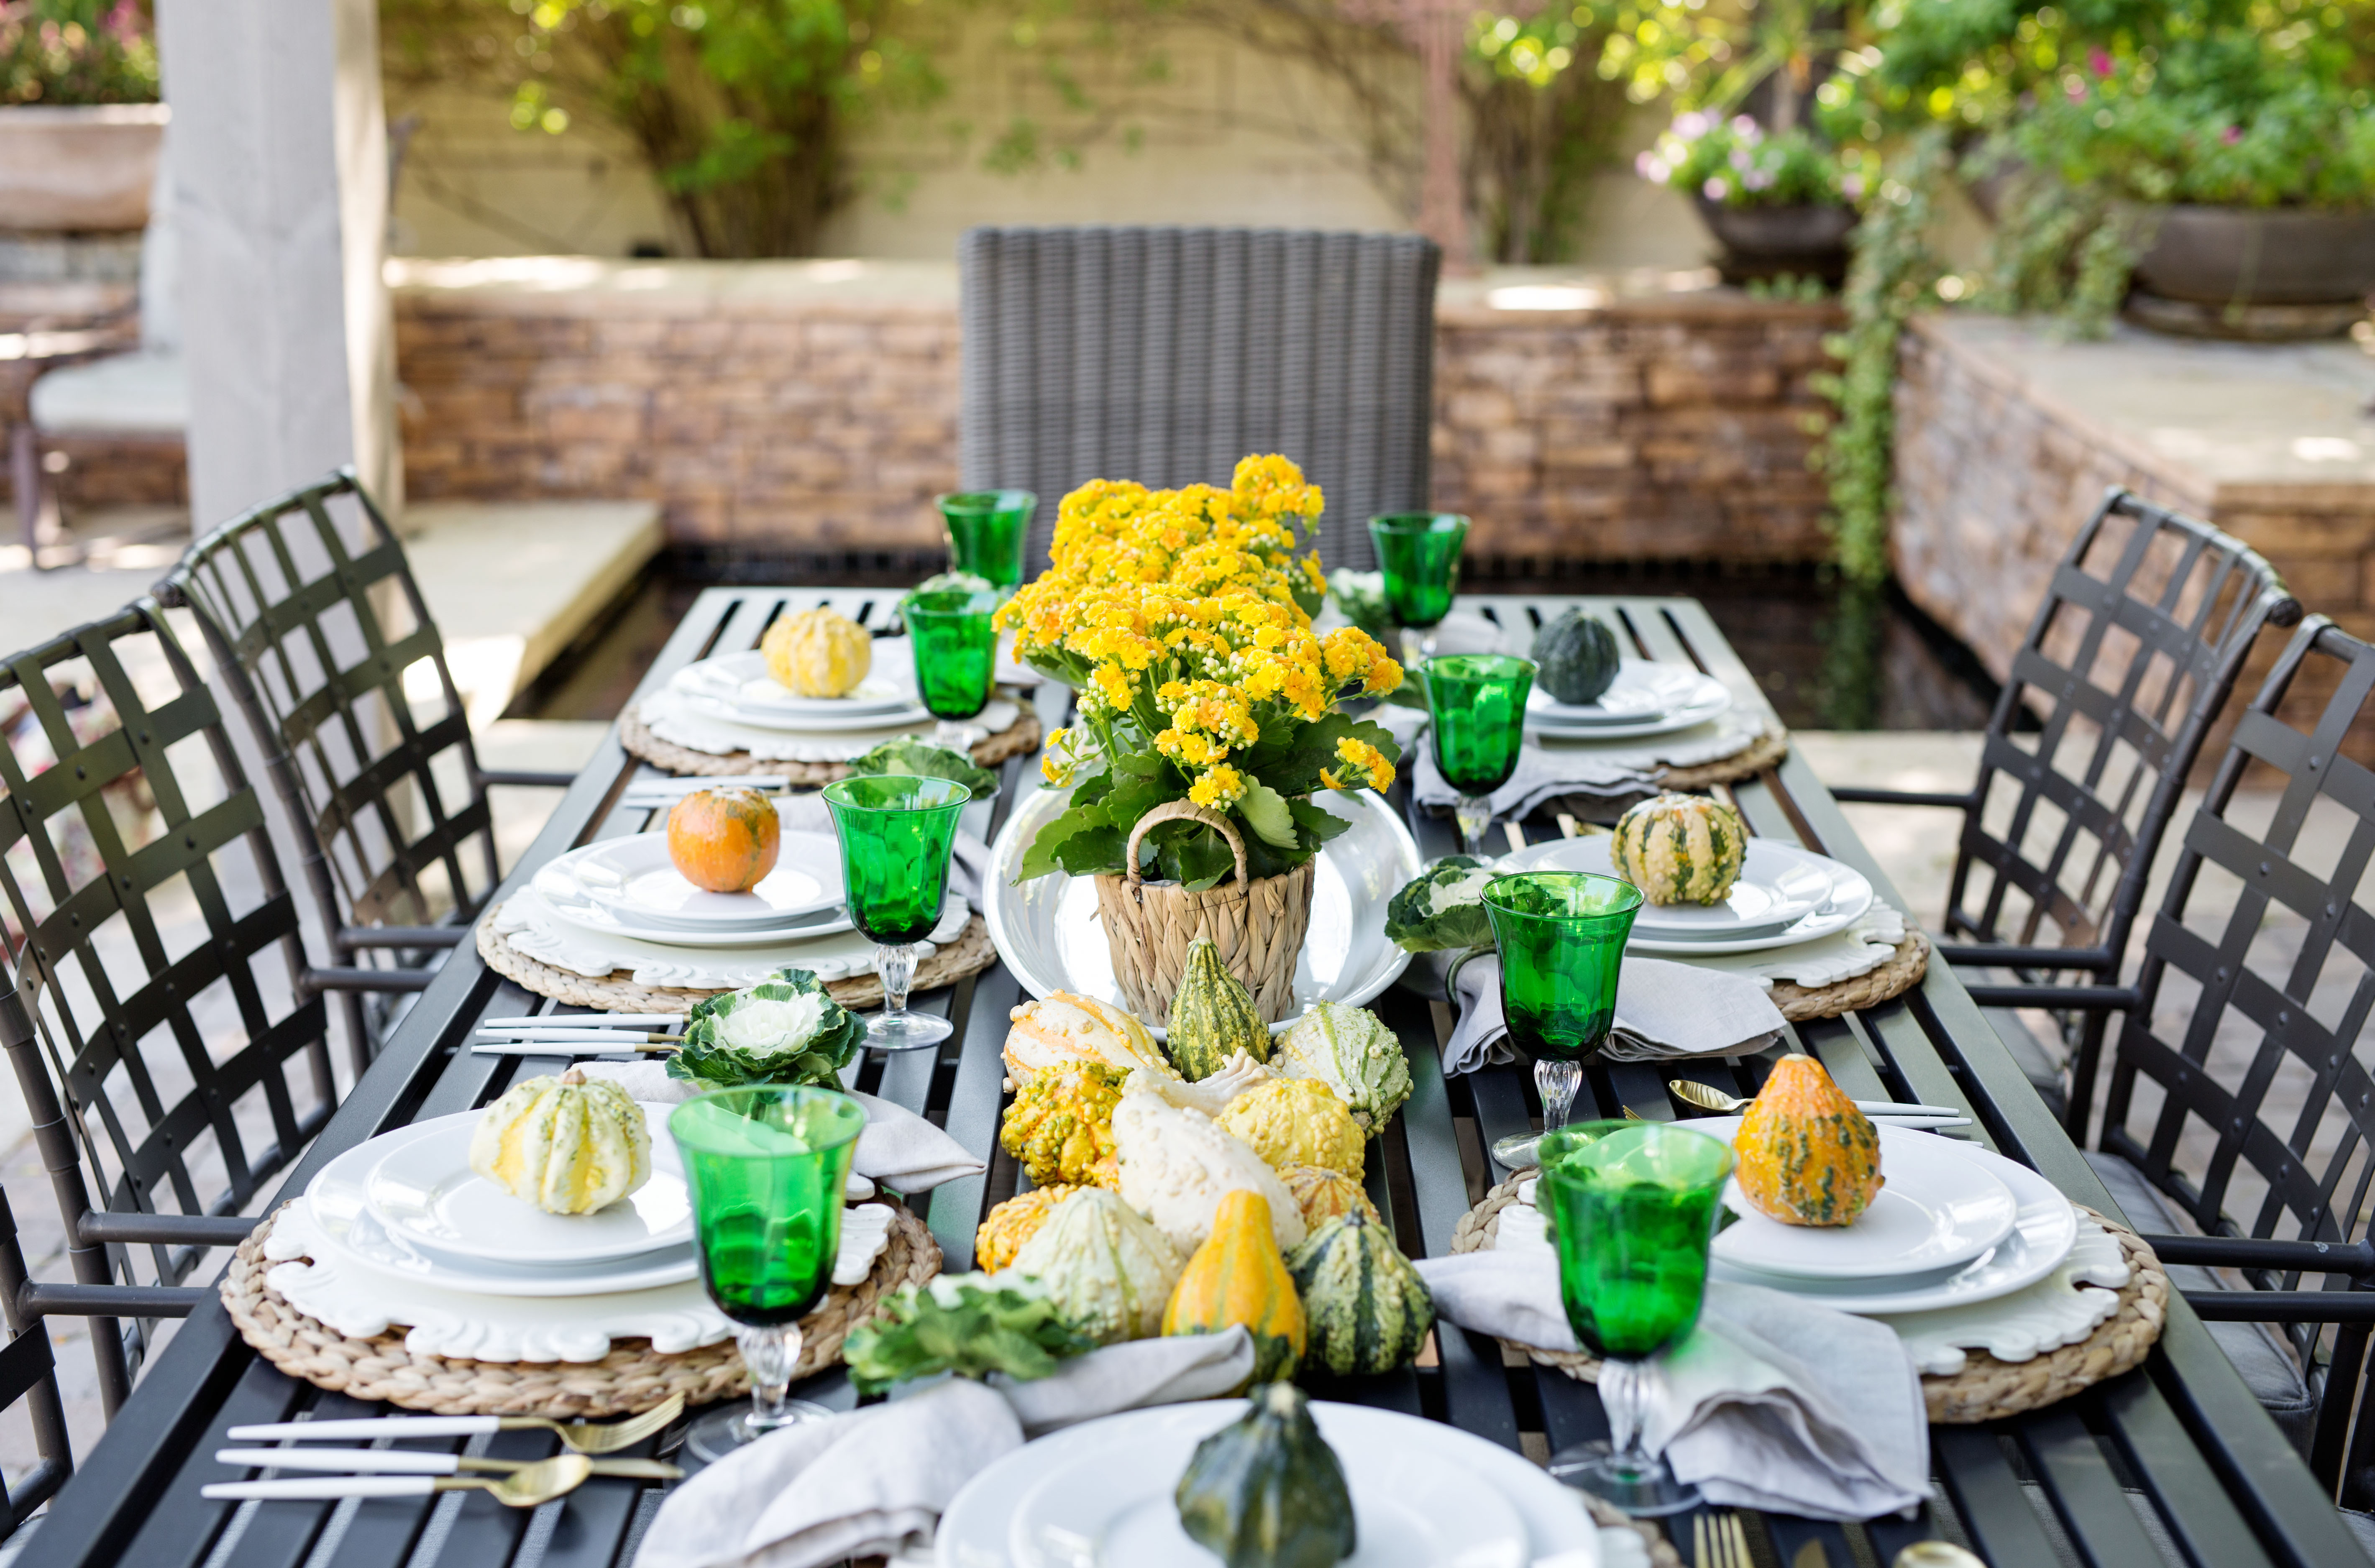 Transitional Fall Table: Using Heirloom Yellow & Green Squash